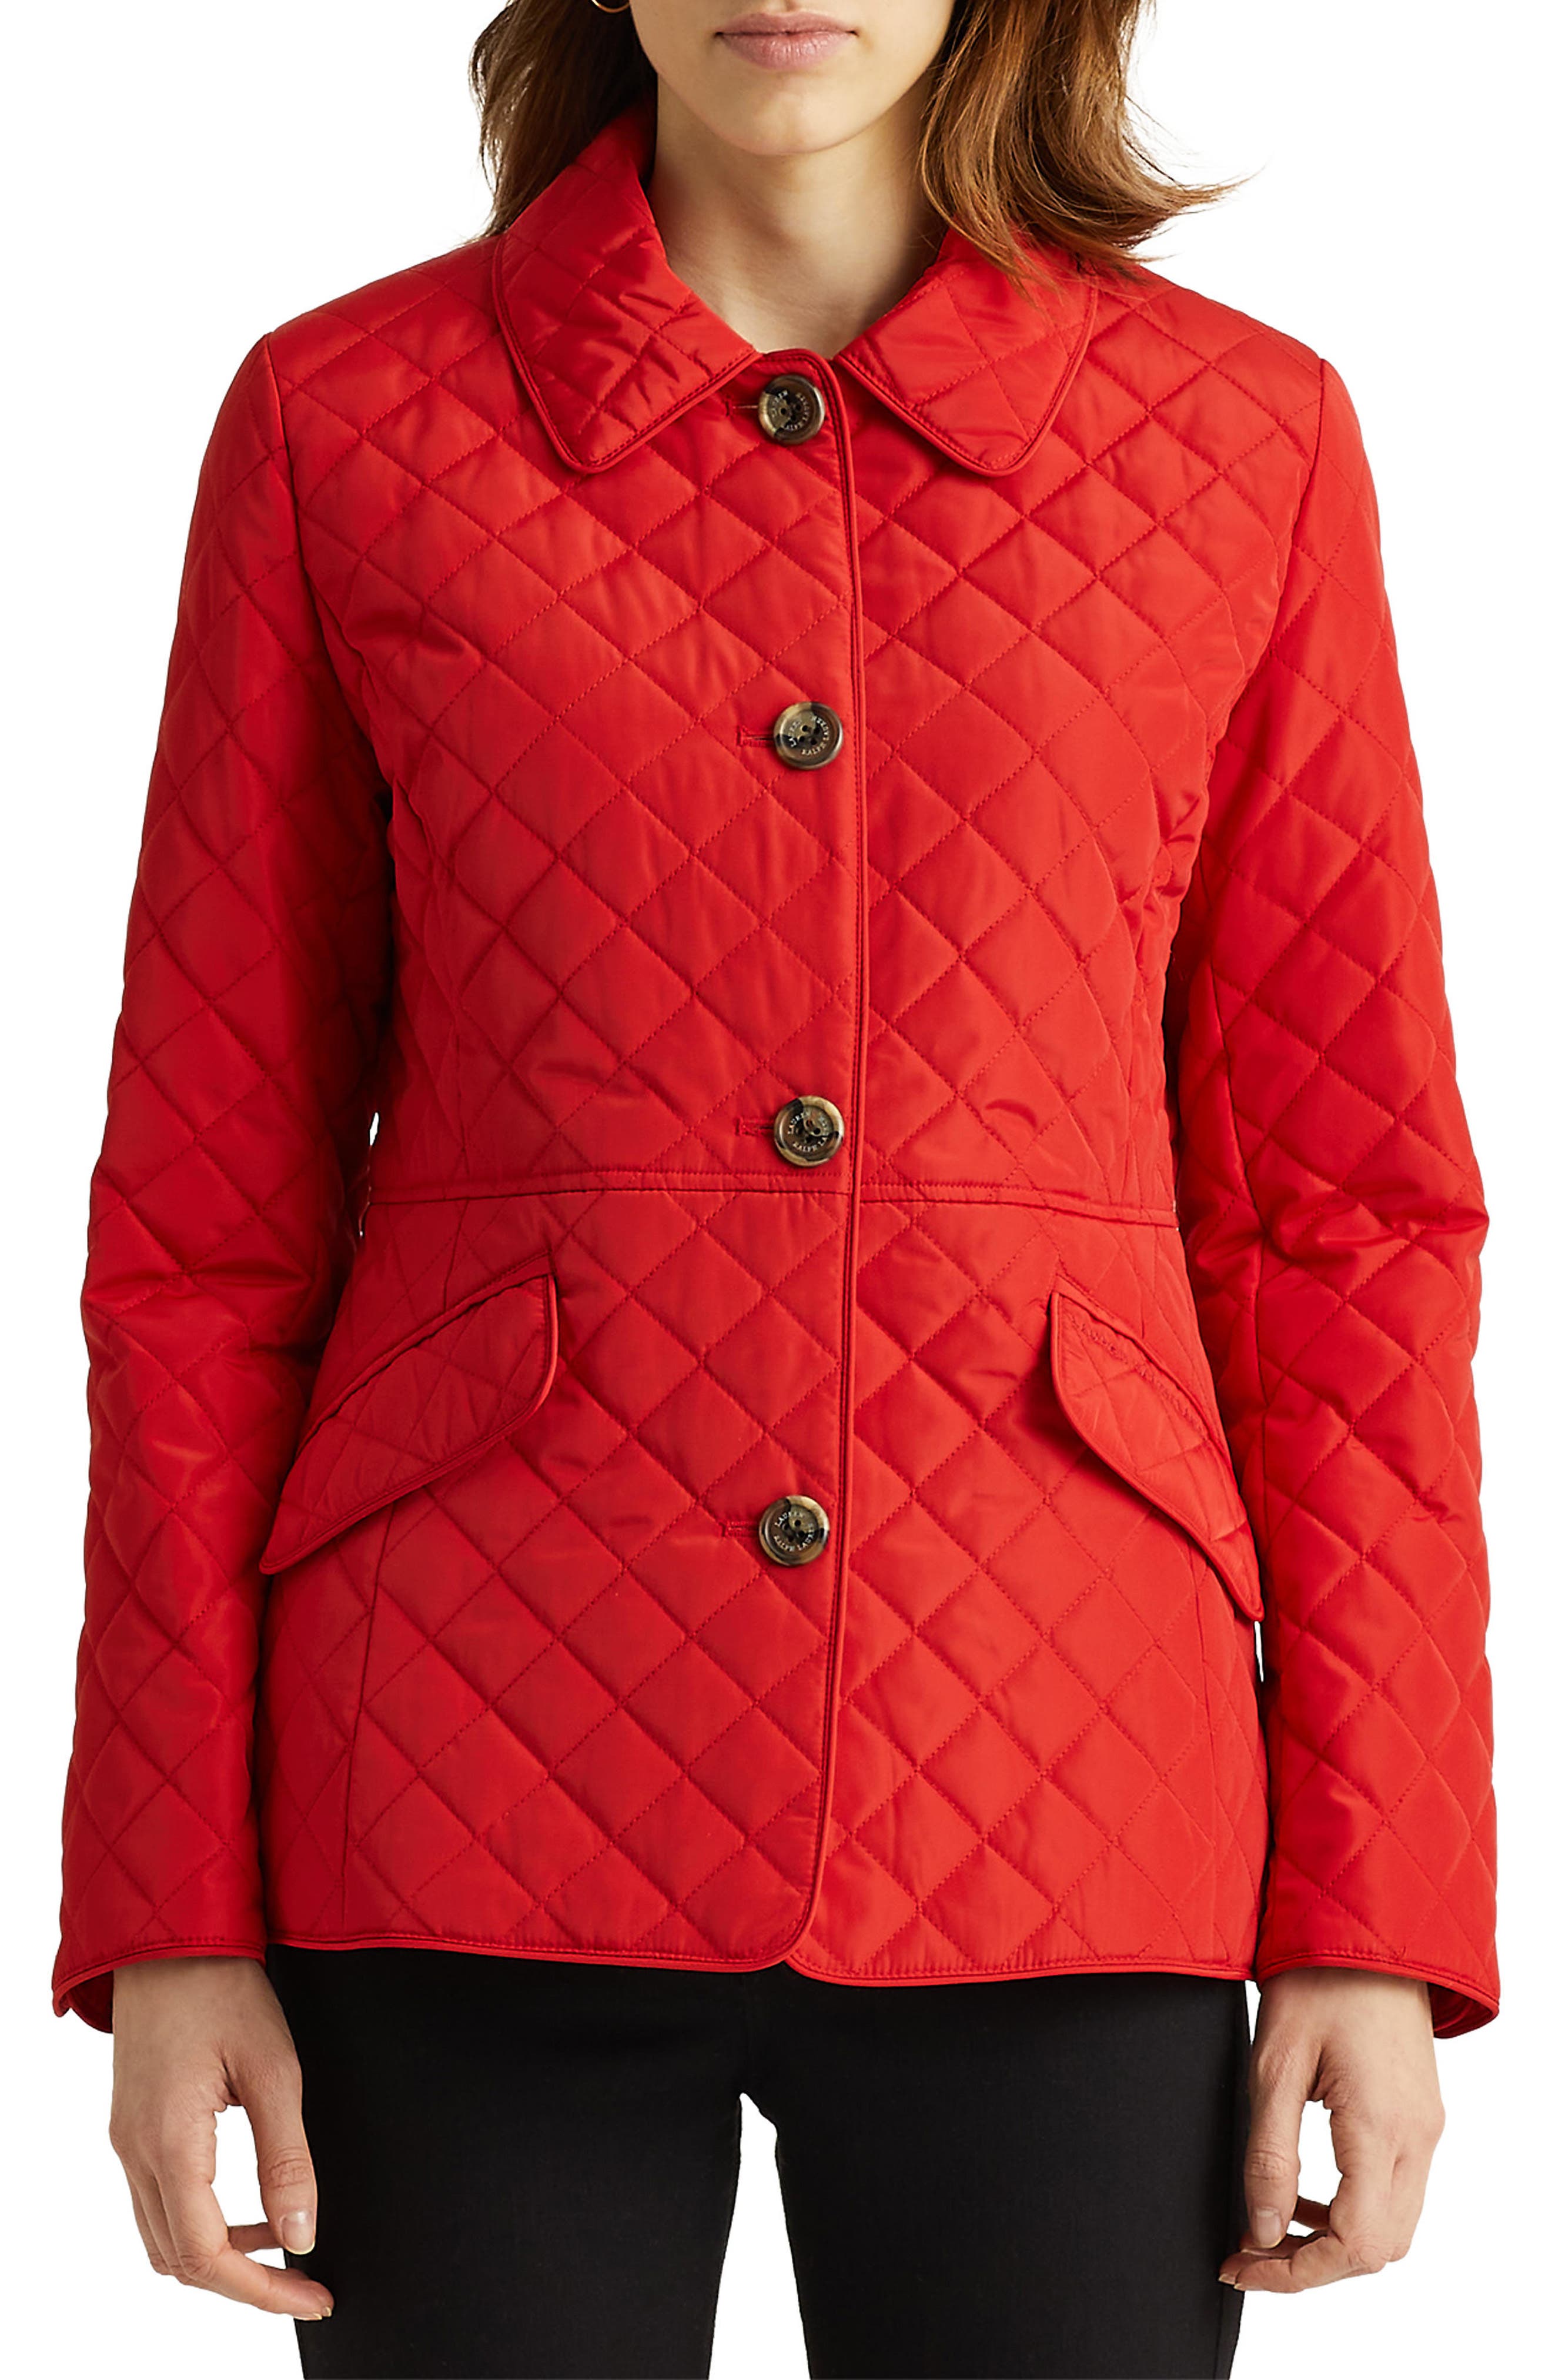 Women/'s wool walk jacket navy blue with dots on red